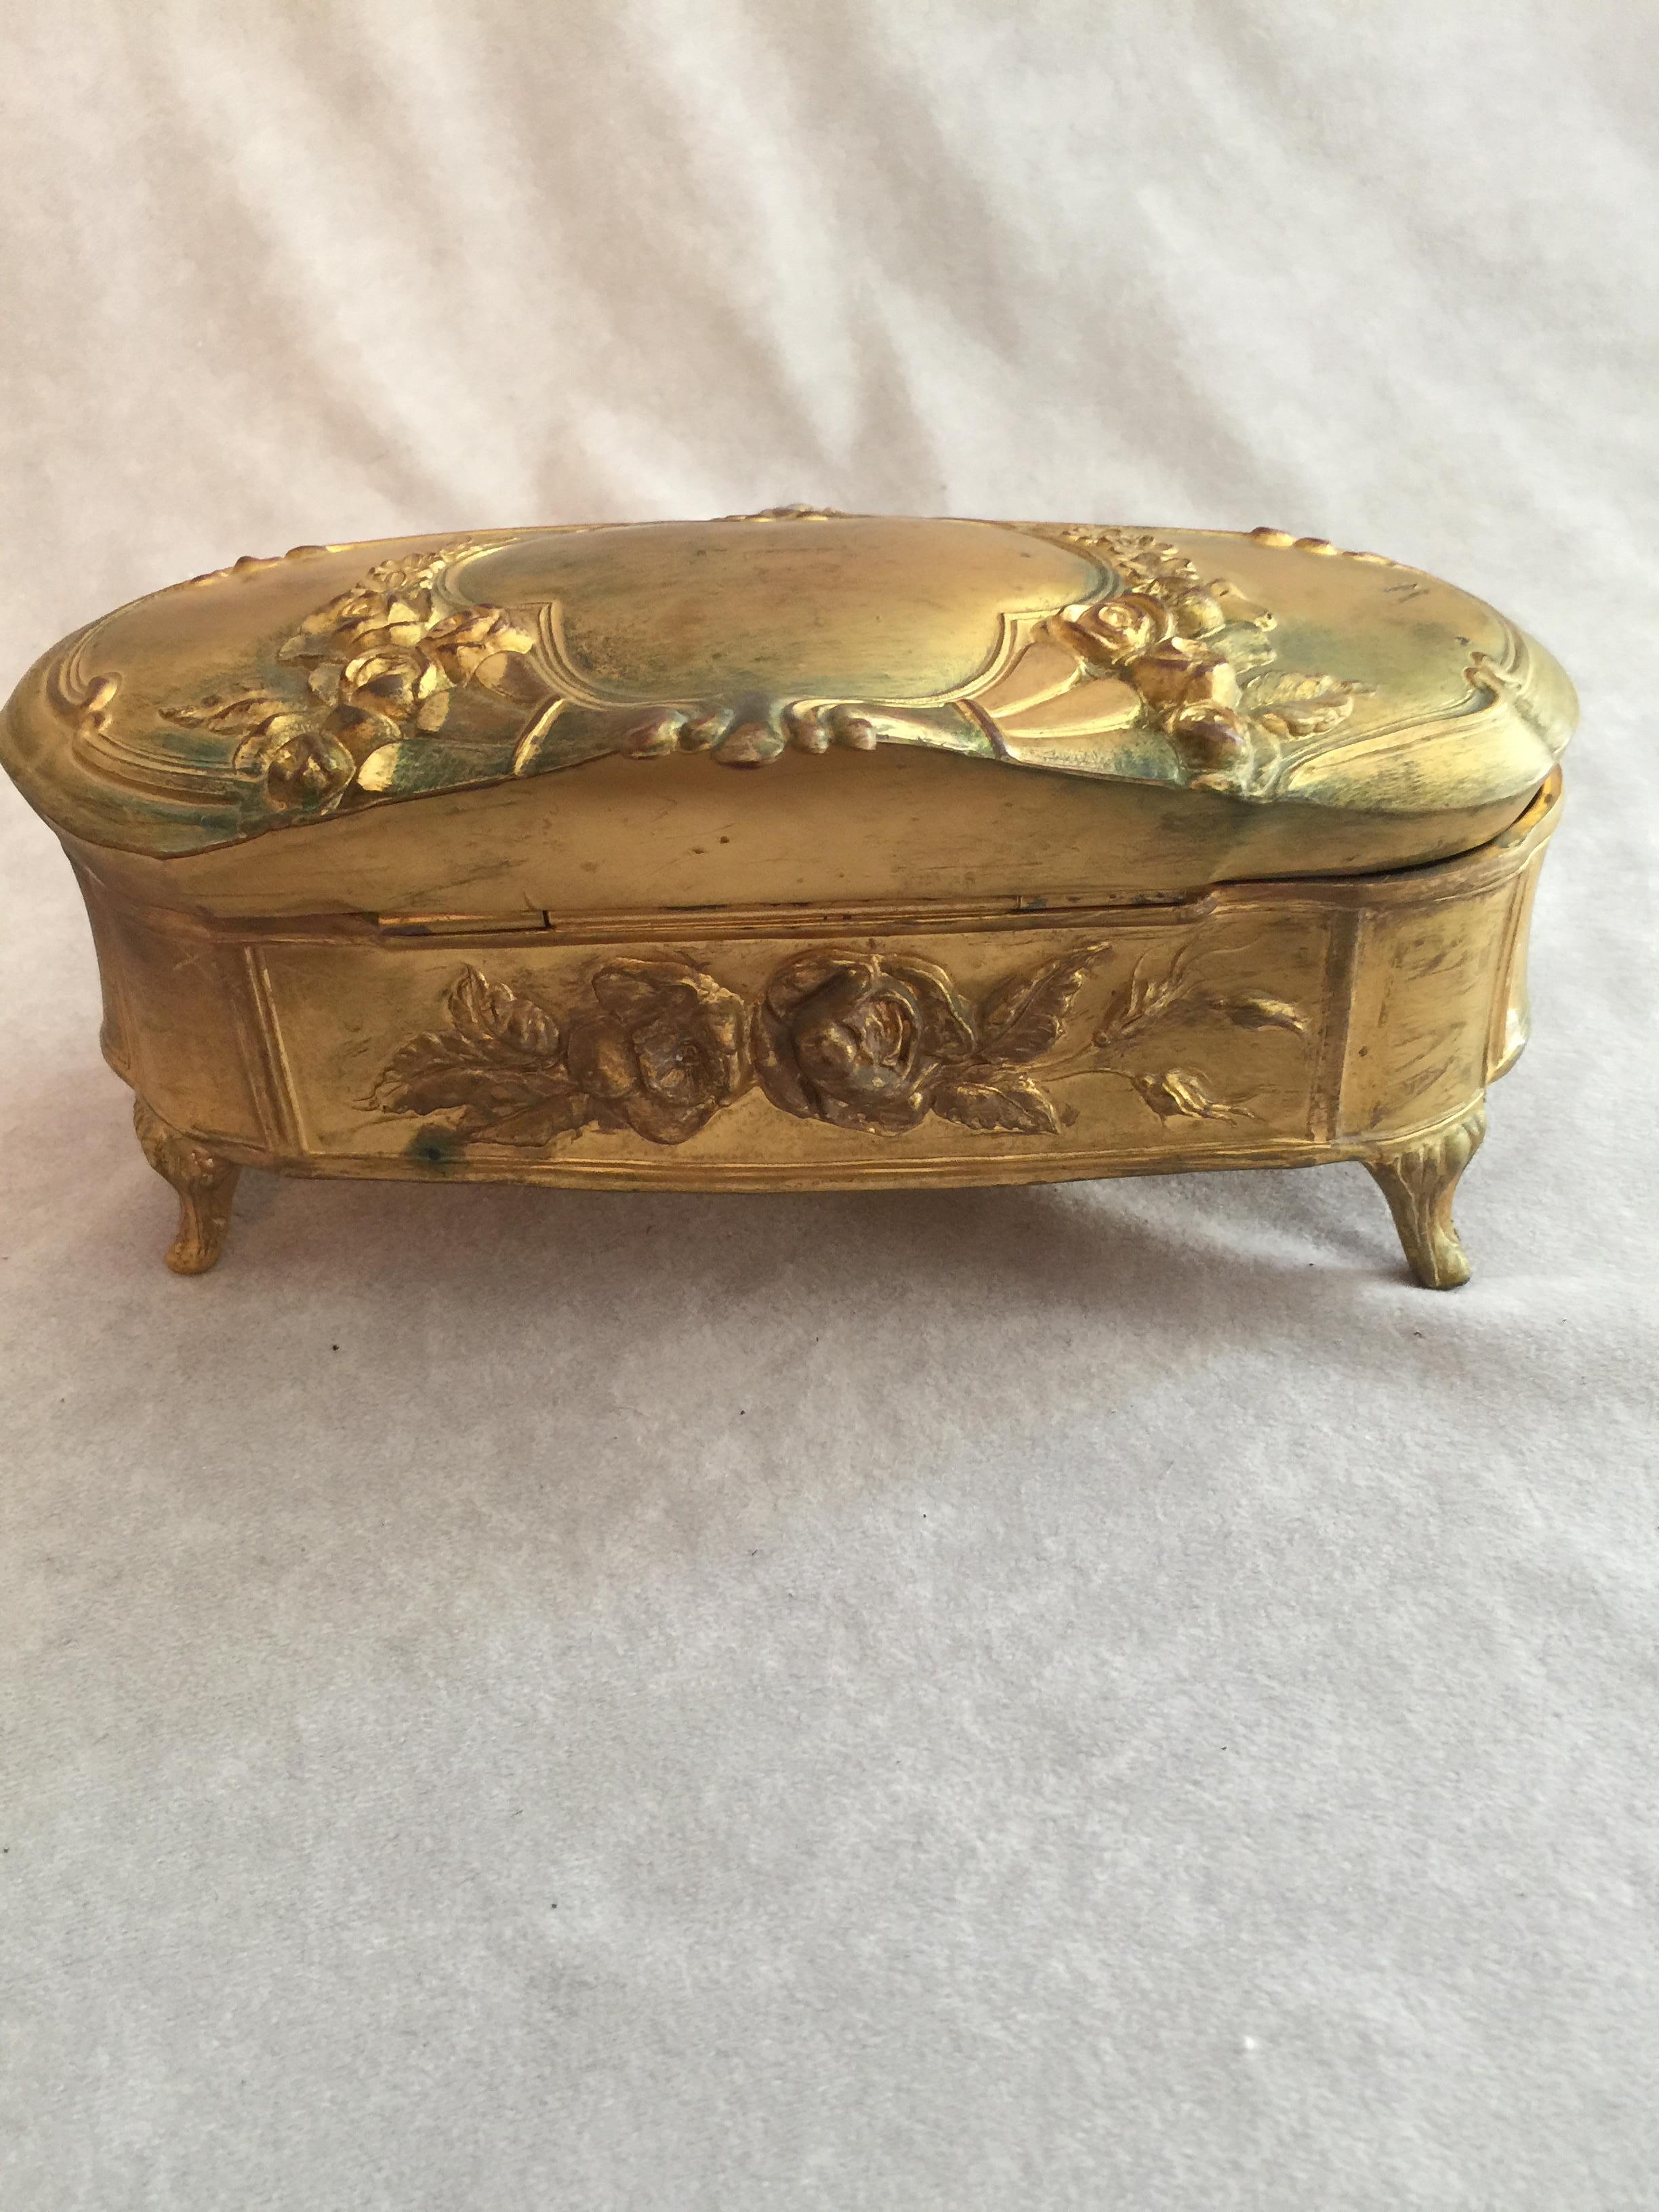 American Antique Gilt Metal Jewelry Box, French Style, ca. 1920